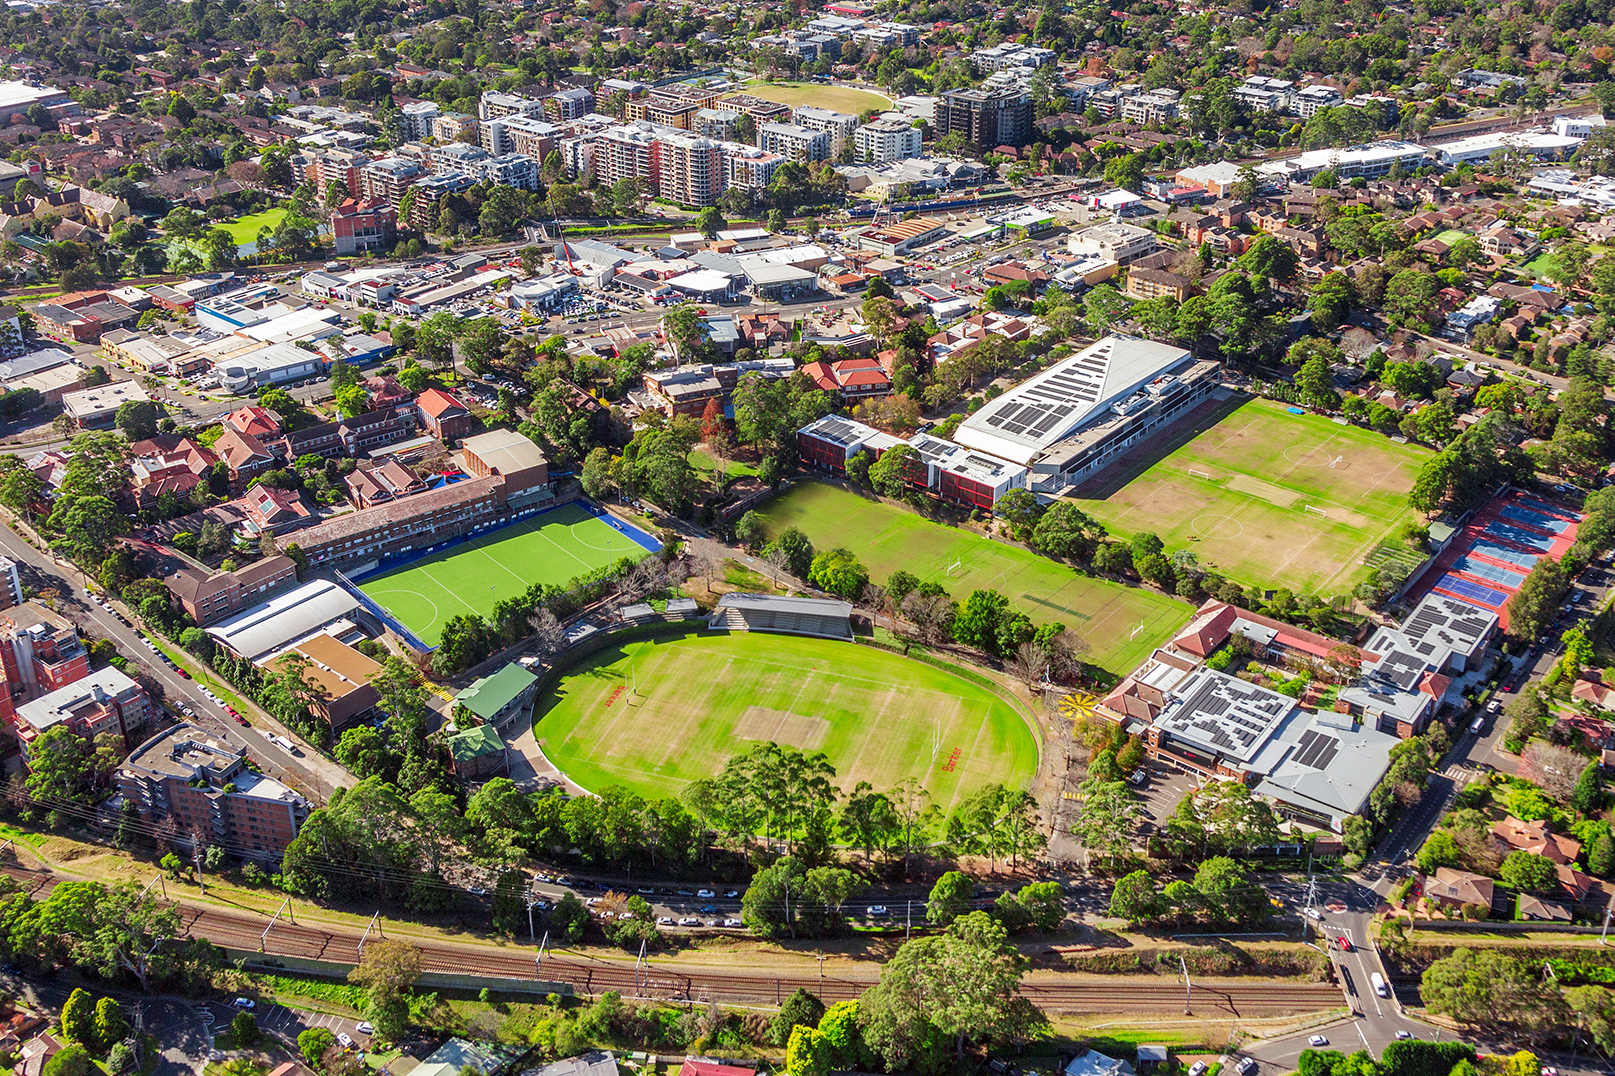 Barker College - An Anglican School